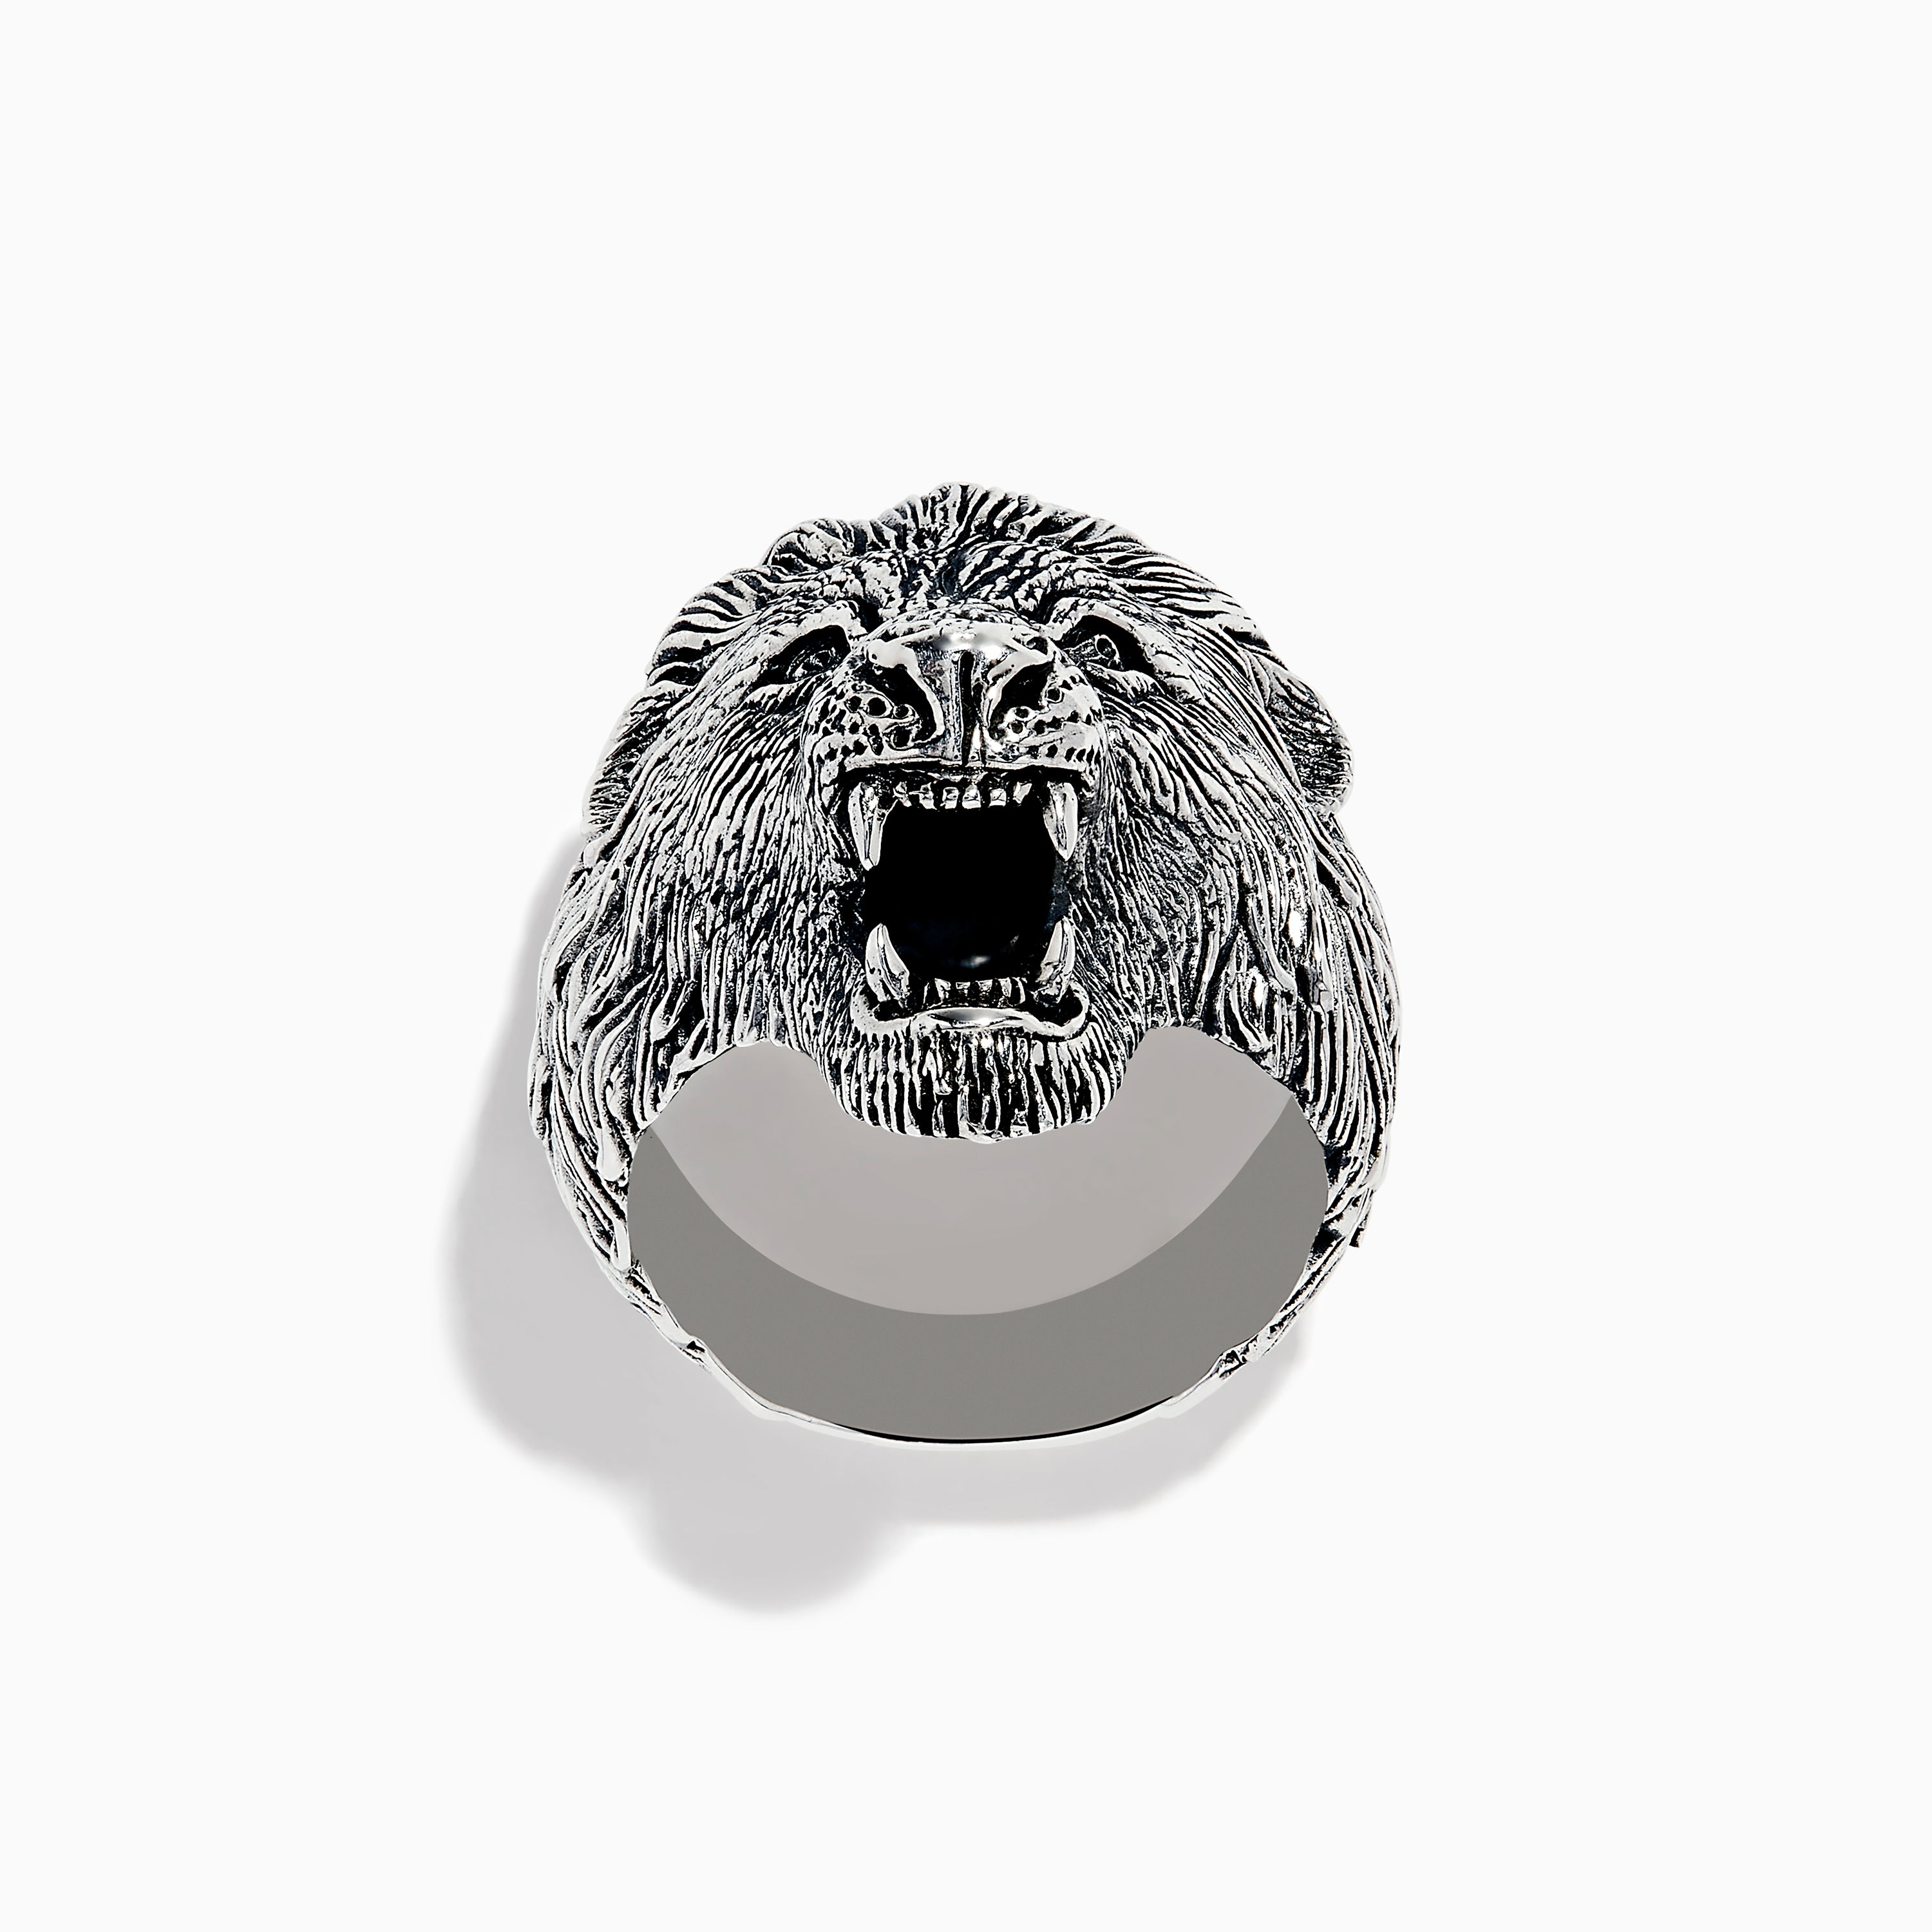 Buy Bali Legacy Sterling Silver Lion Ring (Size 6.0) 9.45 Grams at ShopLC.